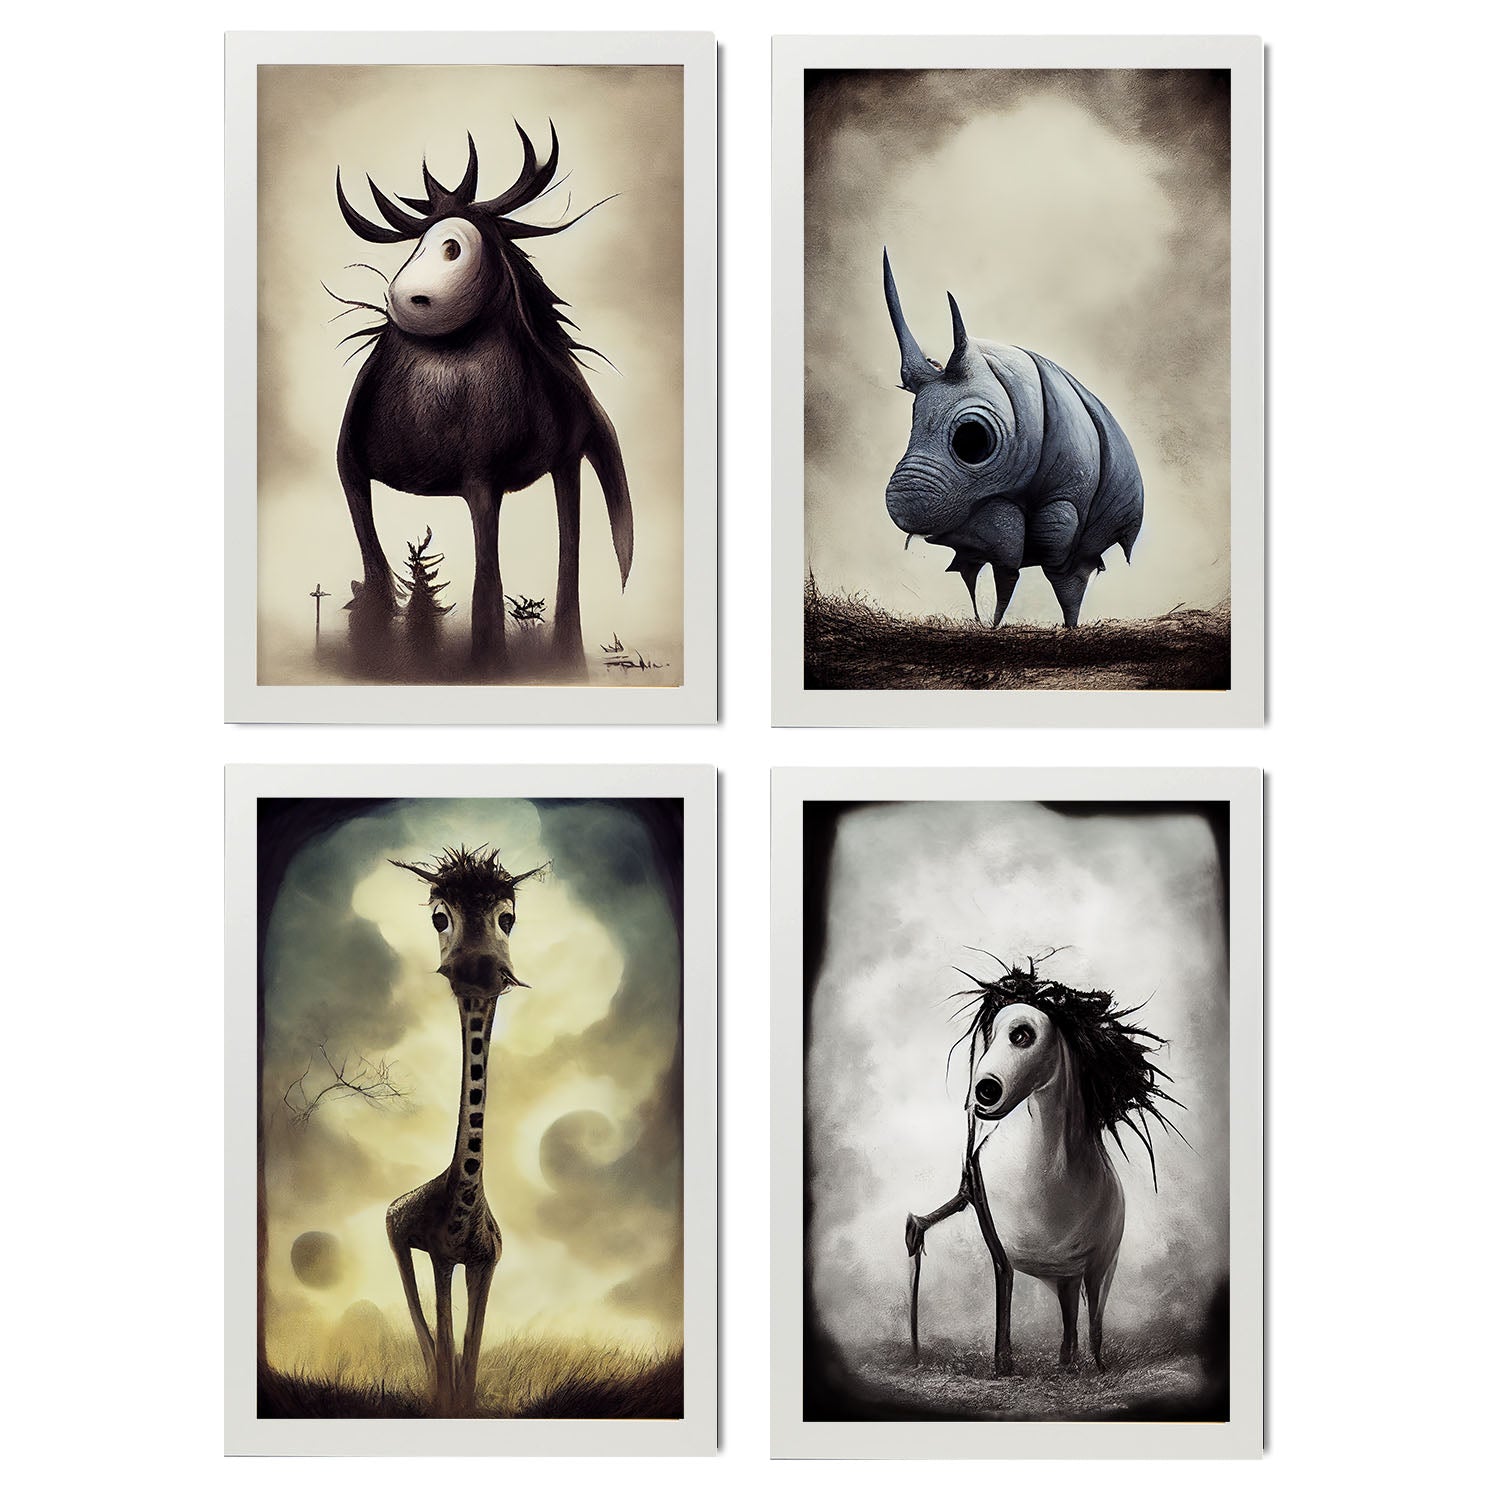 Burton style Animal Illustrations and Posters inspired by Burton's Dark and Goth art Interior Design and Decoration Sets Collection 1-Artwork-Nacnic-A4-Marco Blanco-Nacnic Estudio SL